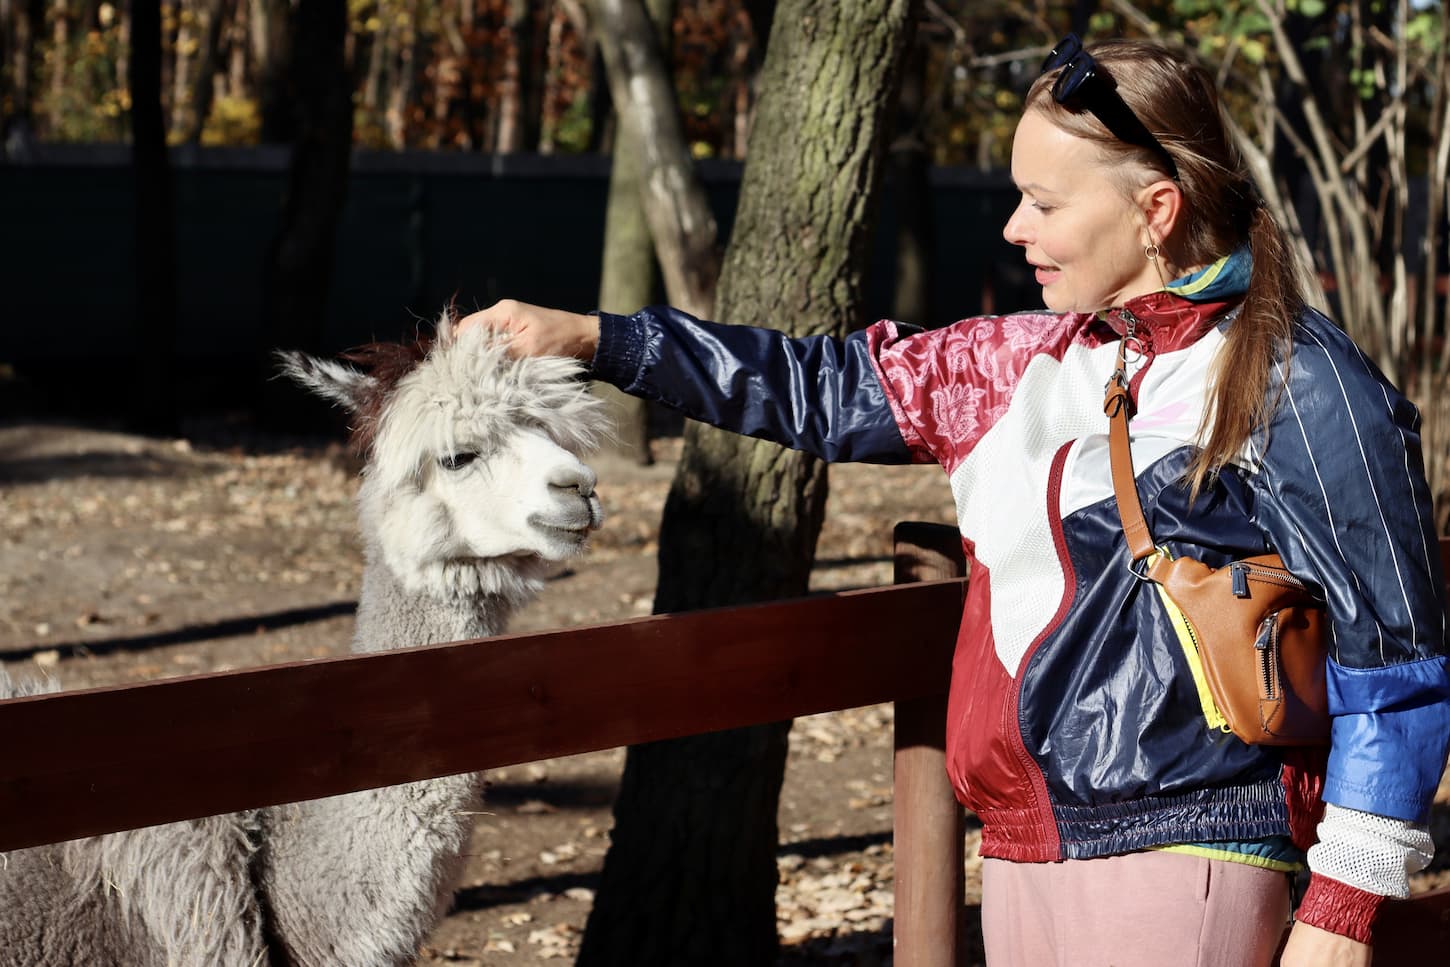 An image of a woman stroking the Alpaca.